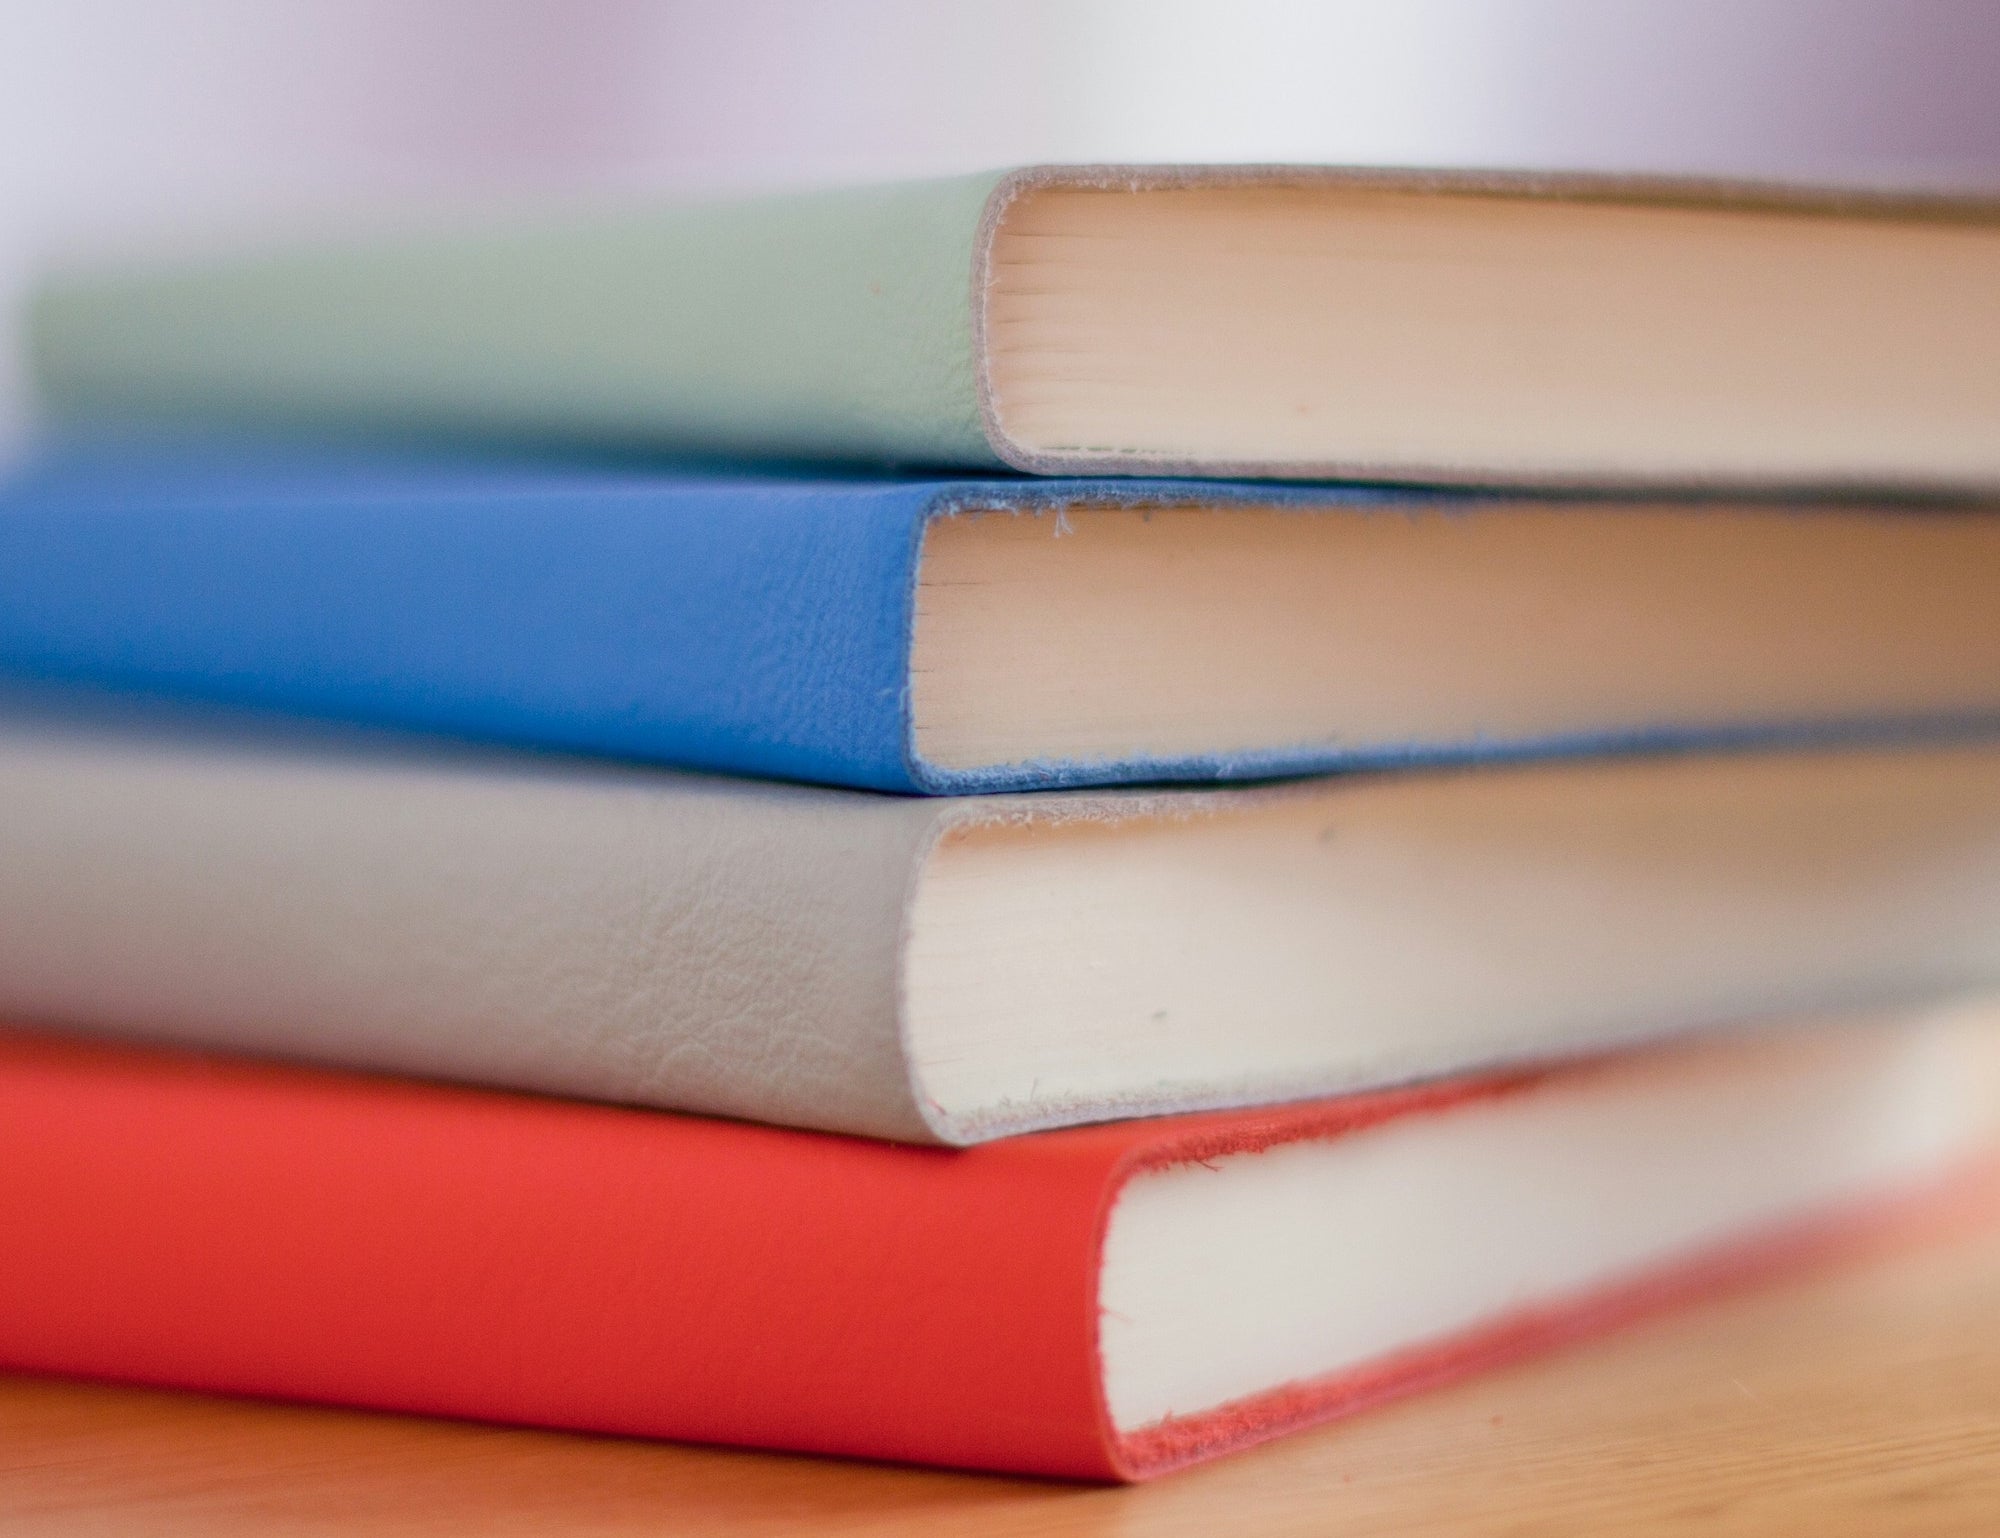 A close-up image of a stack of three hardcover books with no visible titles. The books are positioned in ascending order with a pale green one at the bottom, a blue one in the middle, and a coral red one on top, all set against a softly focused background. The spines show signs of use, indicating they are well-read or handled.